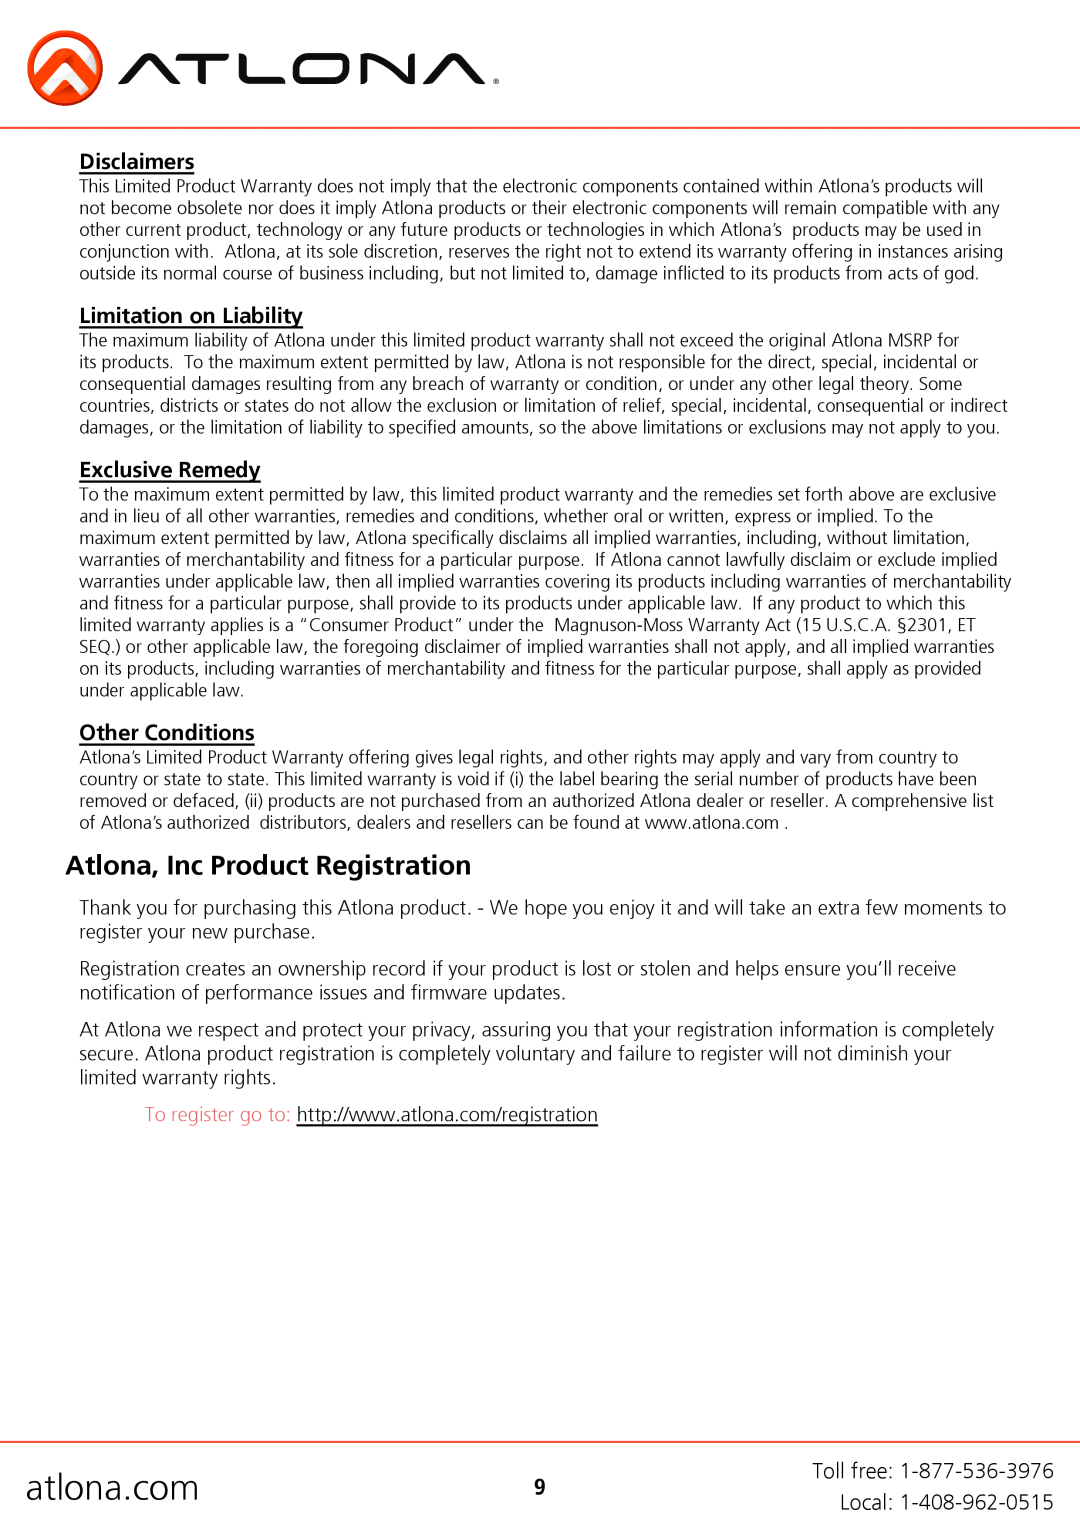 Atlona AT-HD570 Atlona, Inc Product Registration, atlona.com, Disclaimers, Limitation on Liability, Exclusive Remedy 